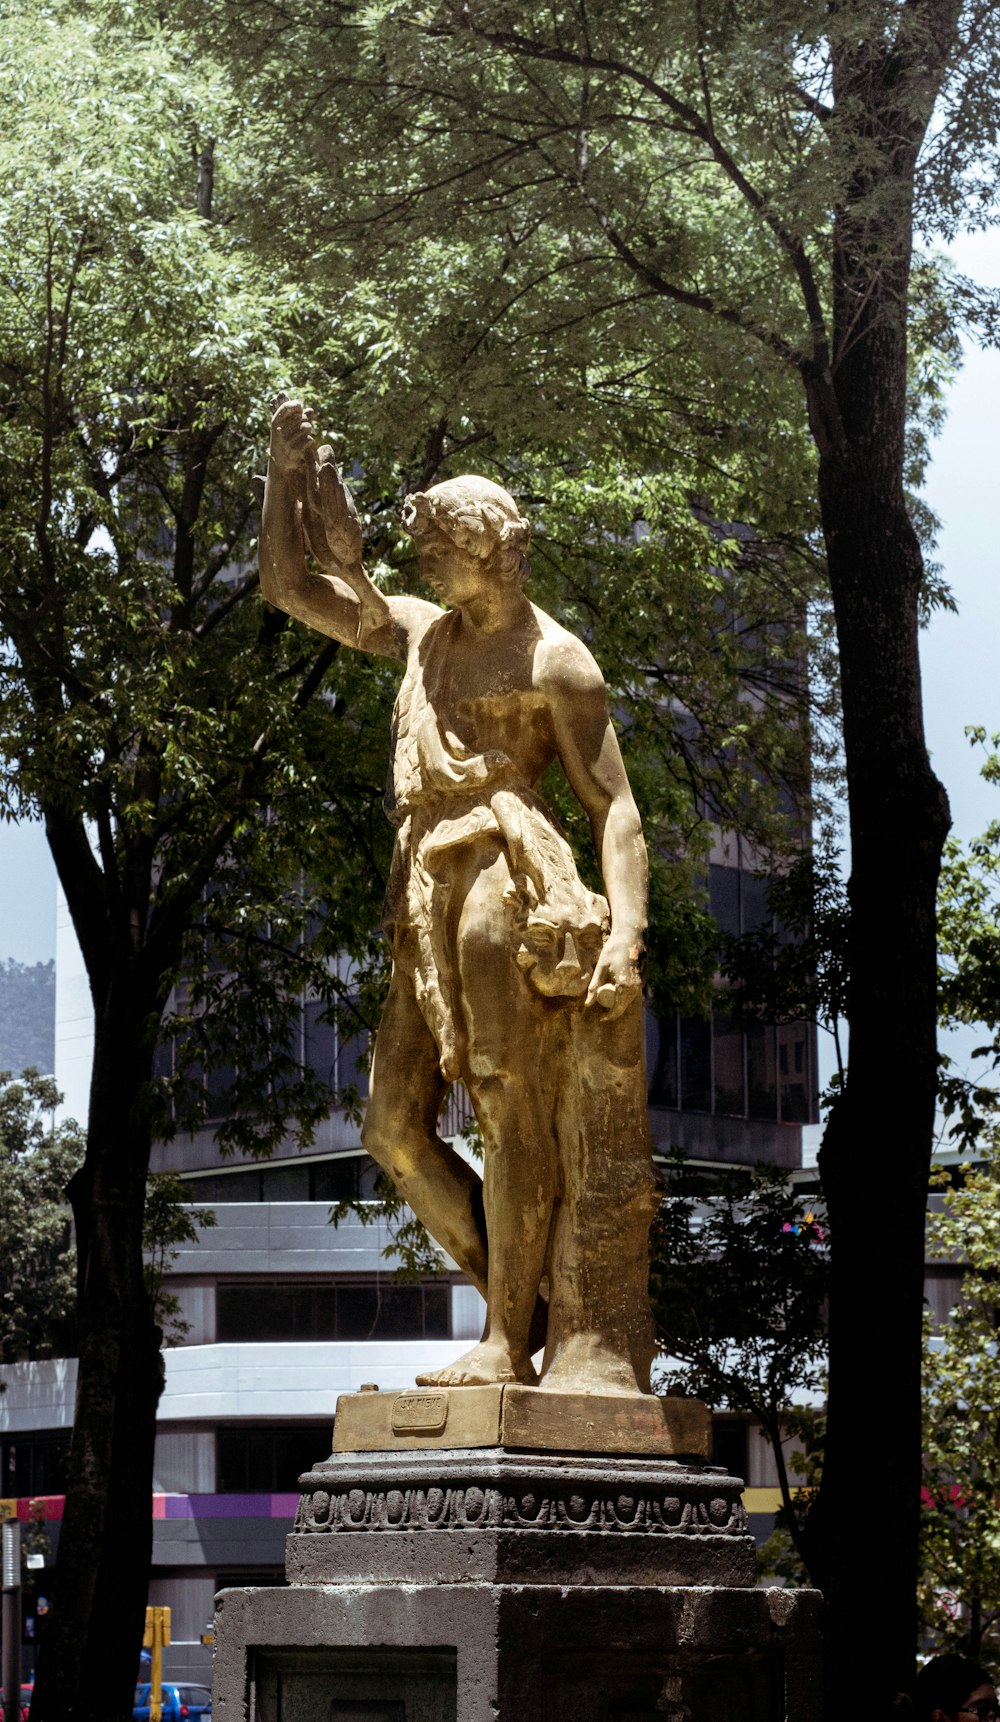 a statue of a person holding a book